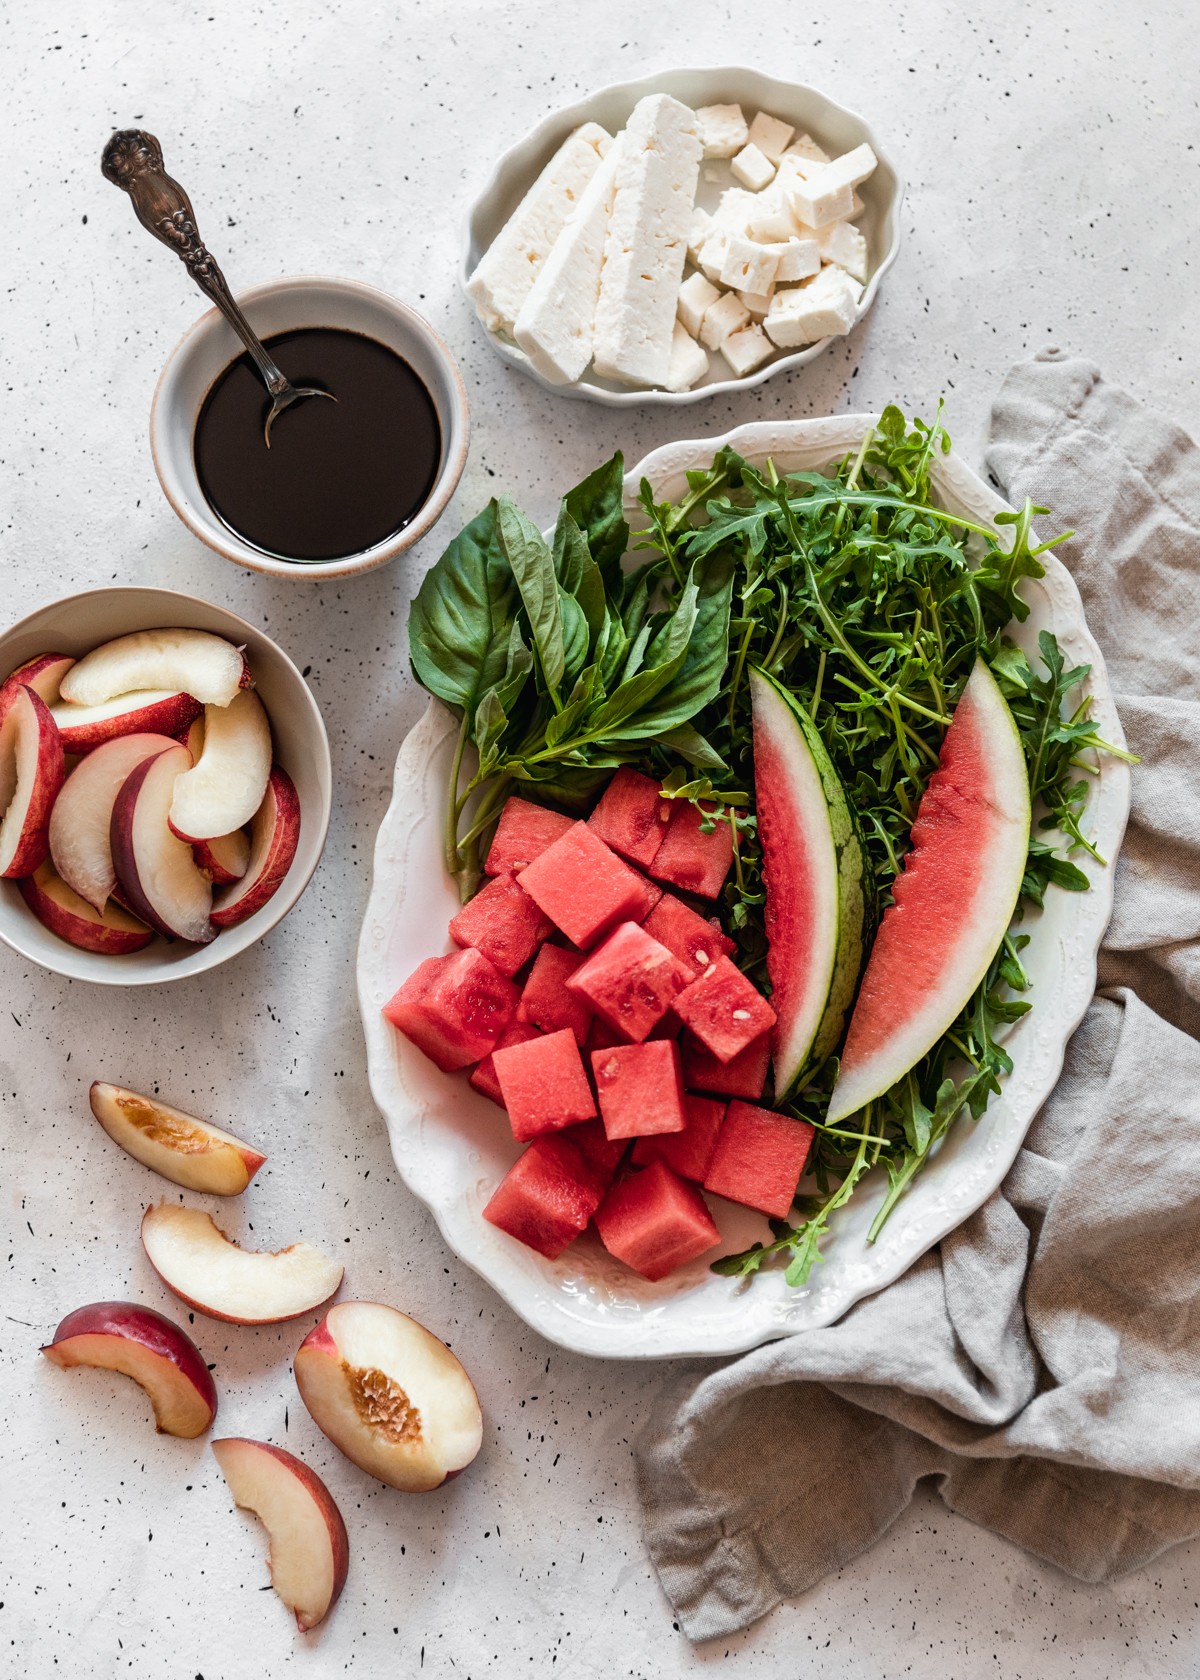 An overhead image of a white tray with cubed watermelon, arugula, and sprigs of basil on a speckled white table next to a beige linen, grey bowl of peaches, white bowl of balsamic, and oval white dish filled with feta cubes.